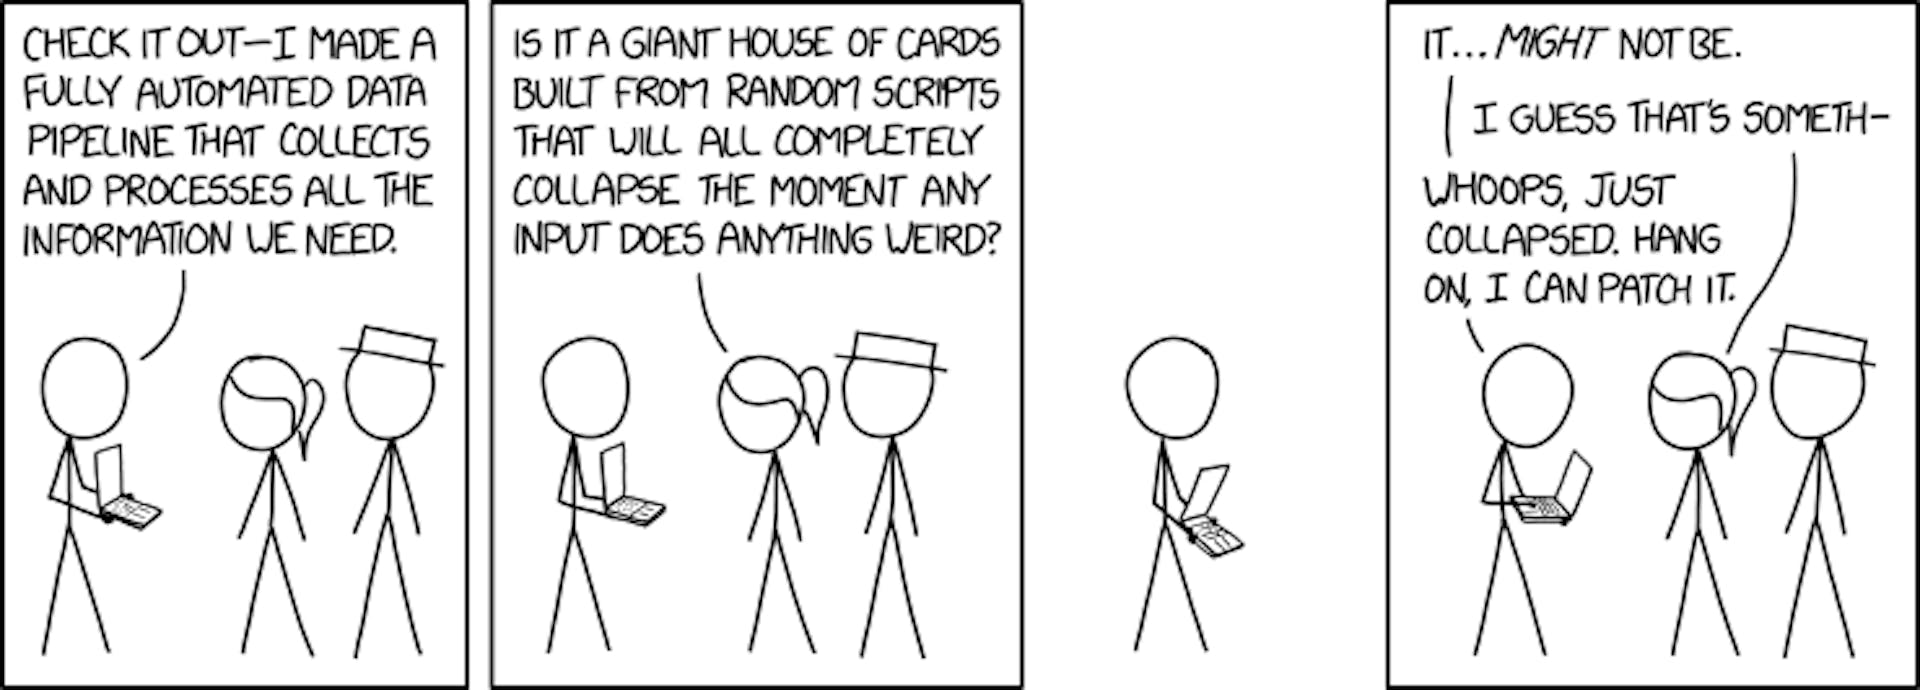 Bad data enters even the most well designed data pipelines. https://xkcd.com/2054/